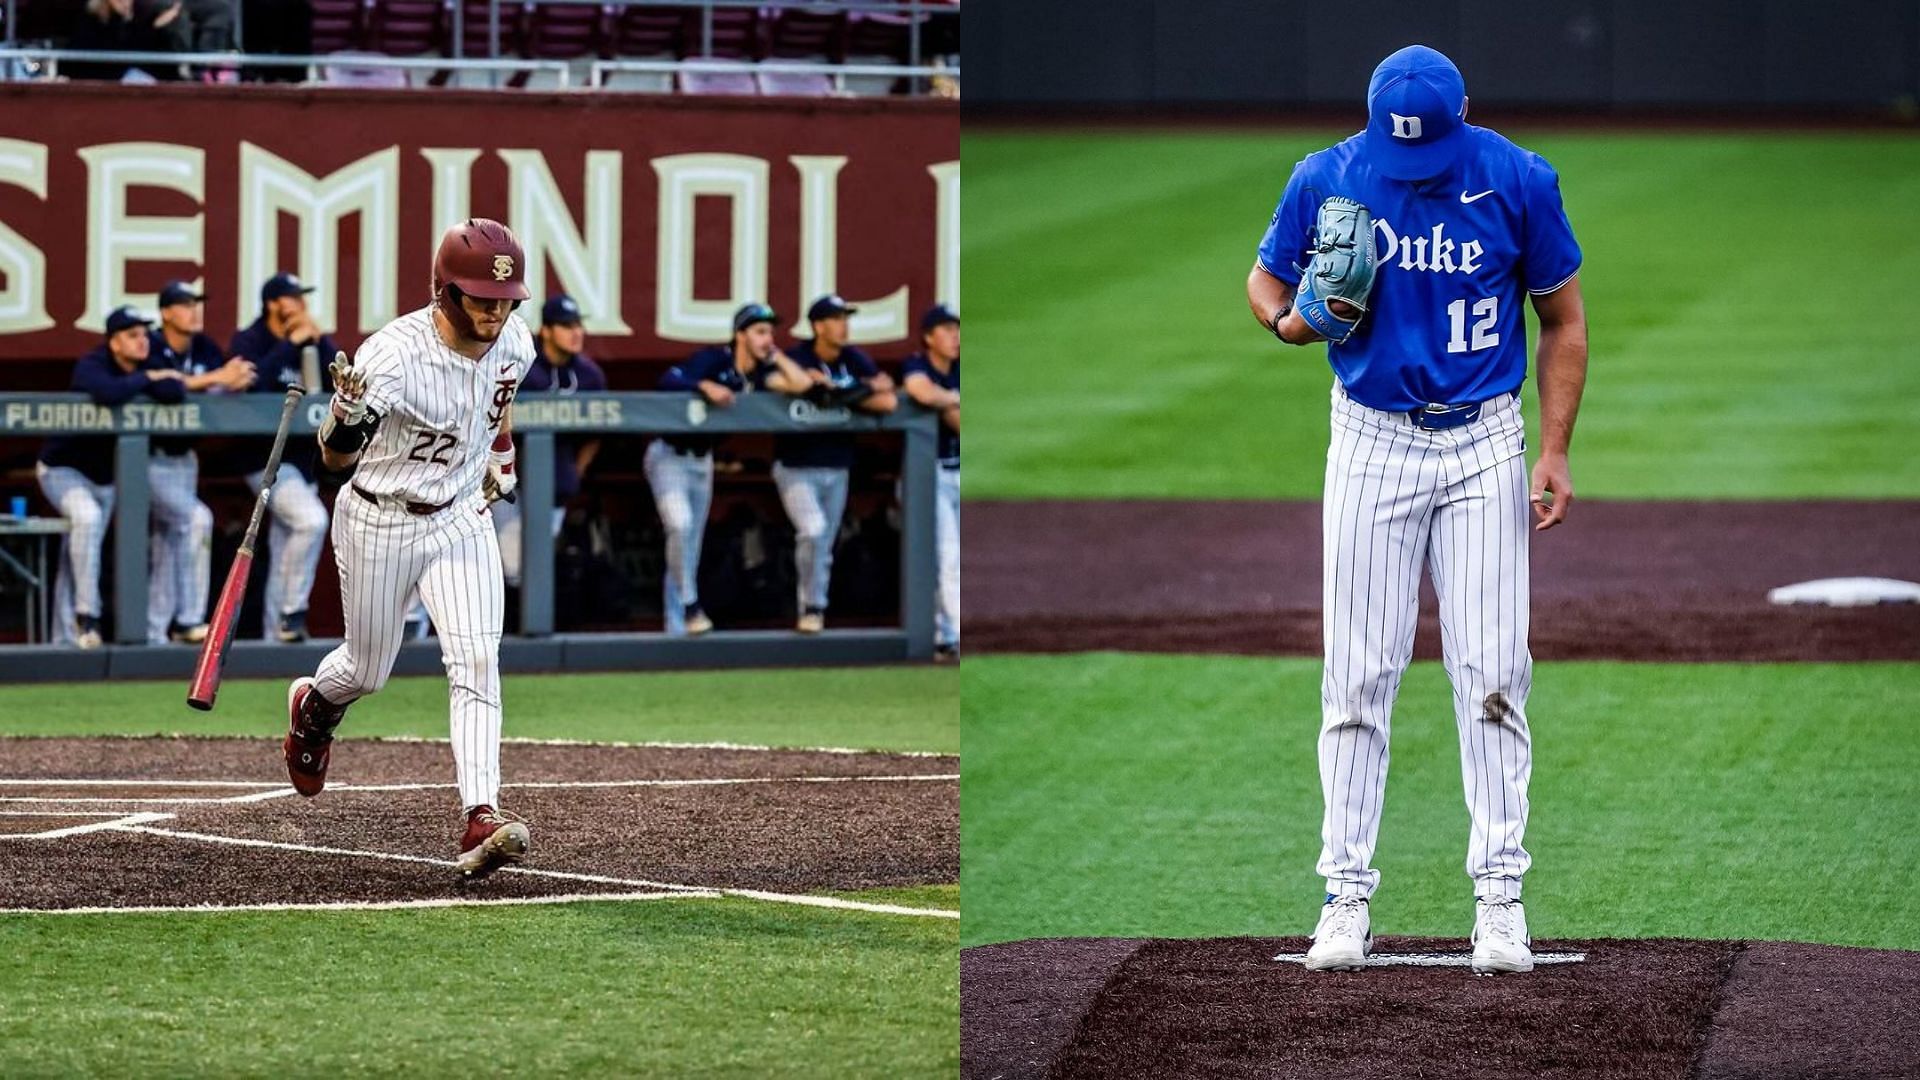 The Seminoles will clash with the Blue Devils in the ACC title game